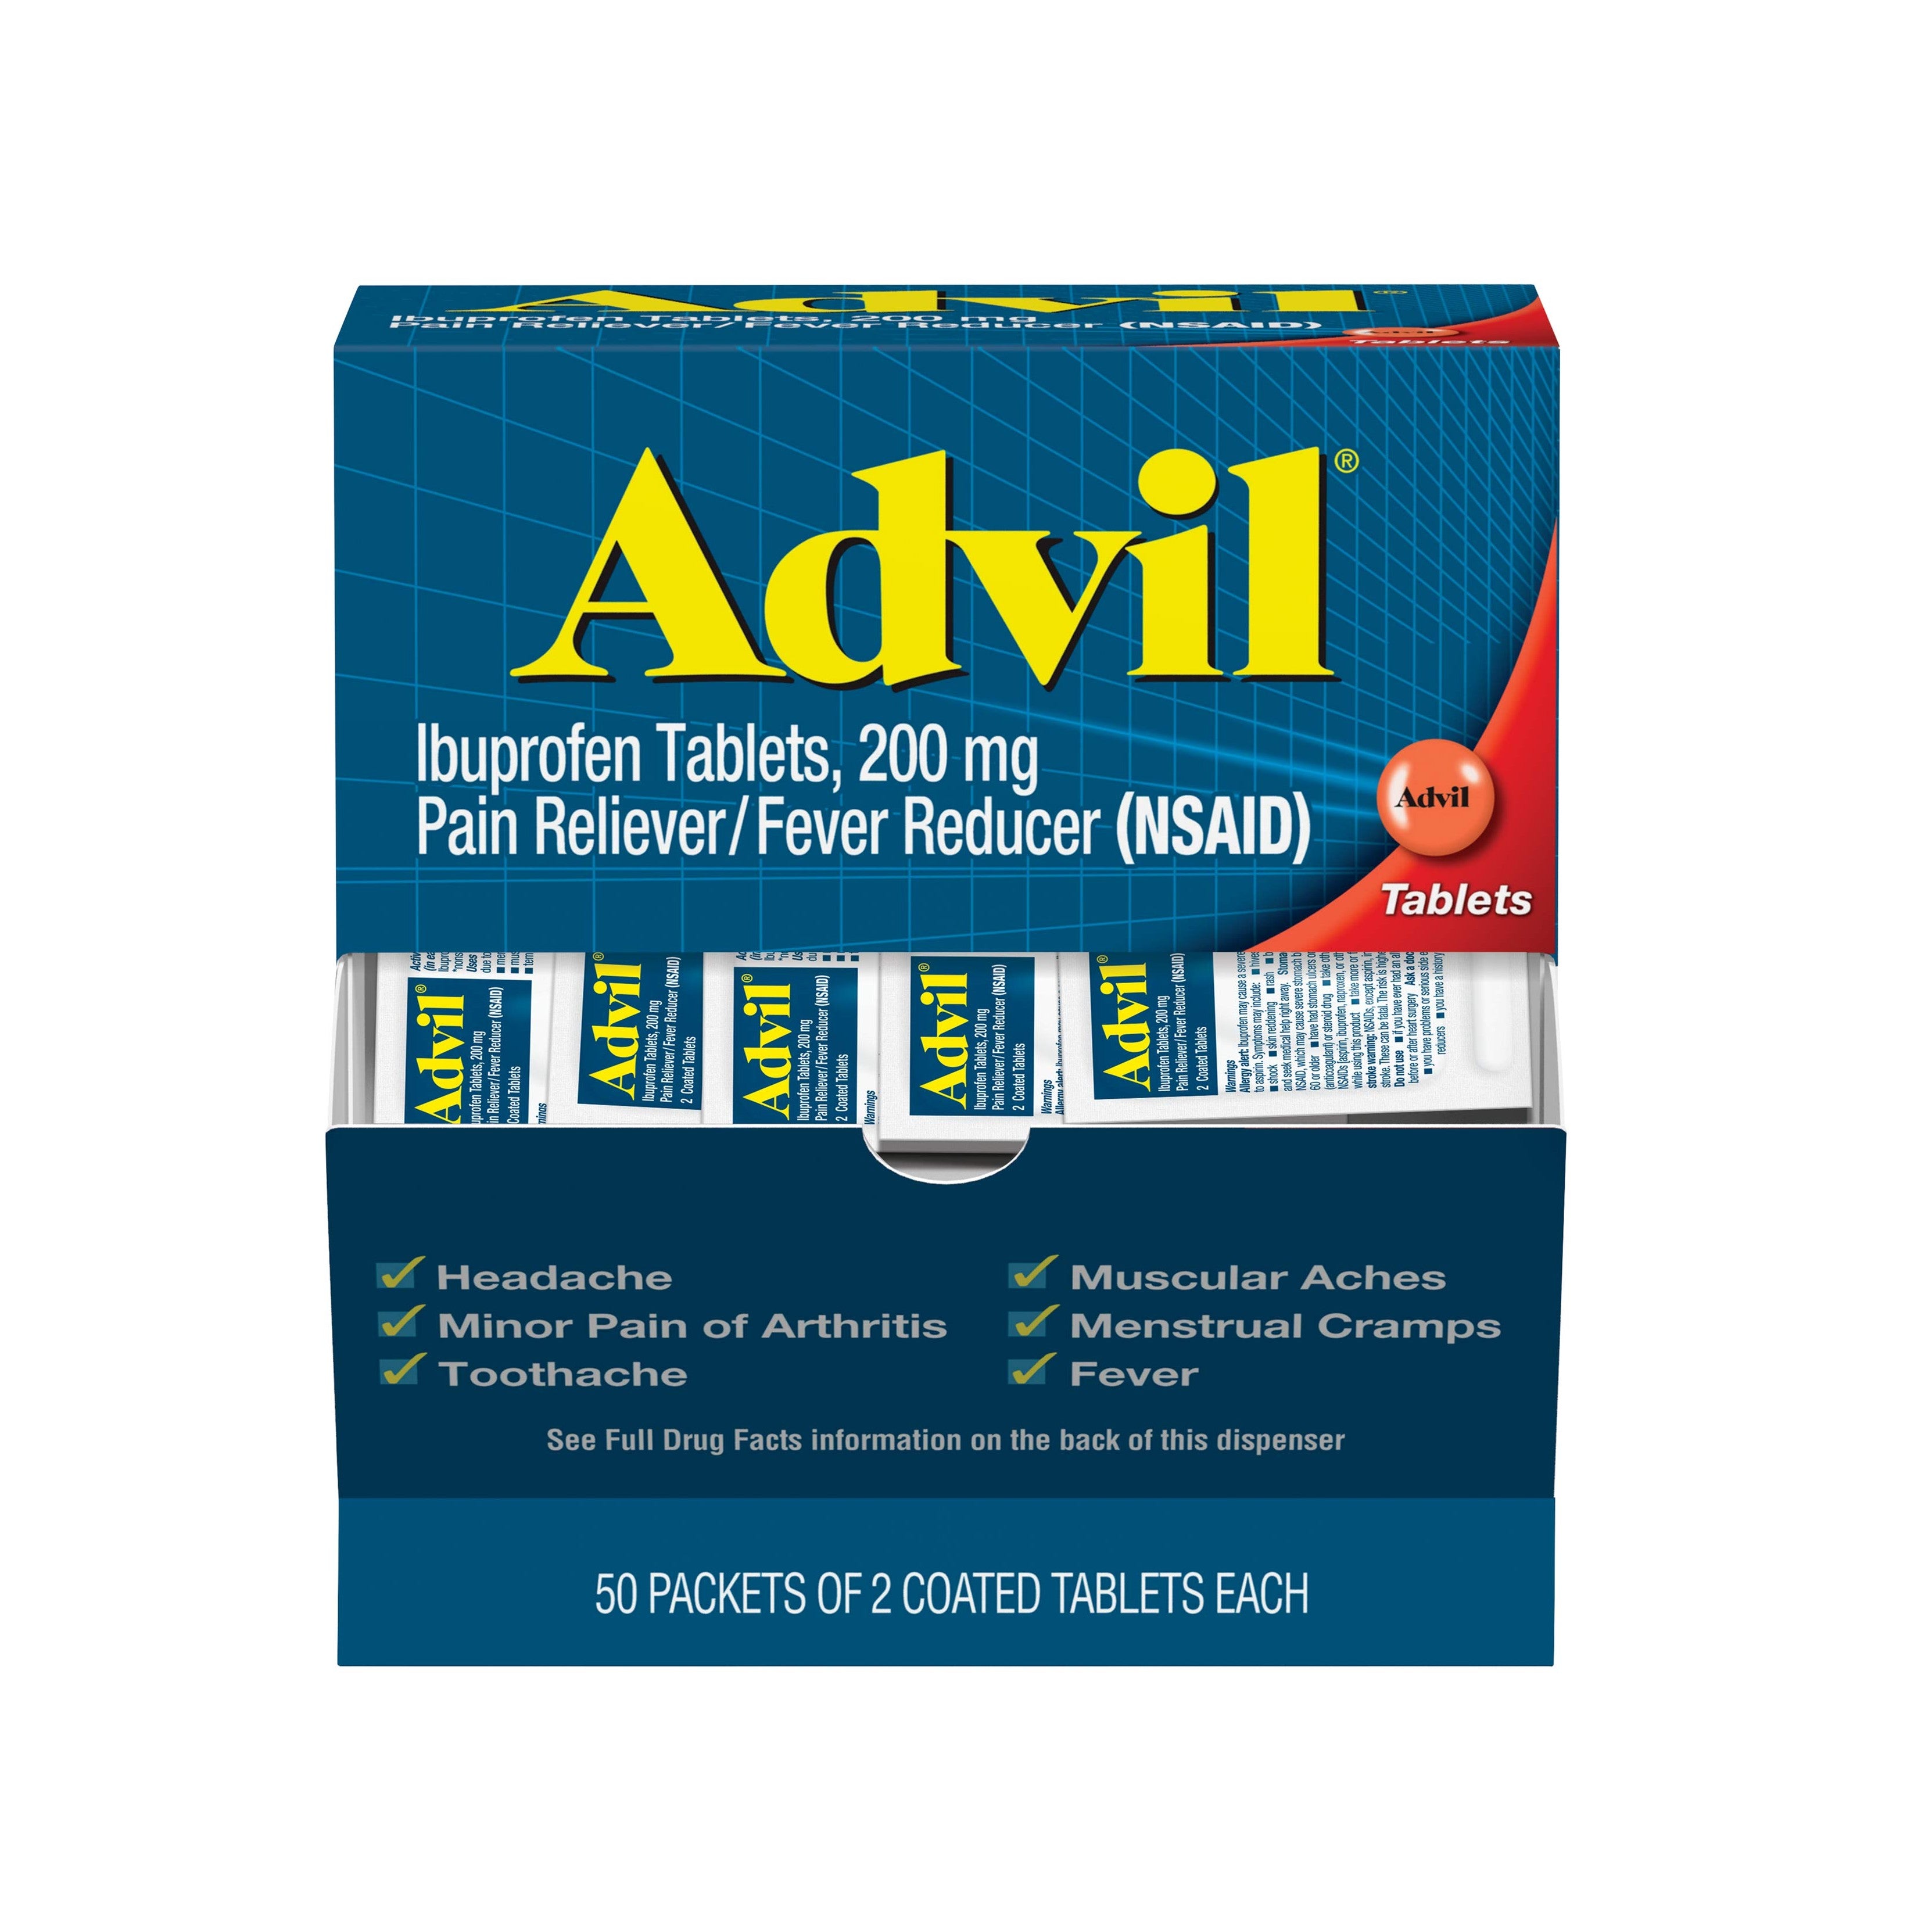 Advil Coated Tablets, Ibuprofen 200mg, 100 Count (50 Packets of 2 tablets)